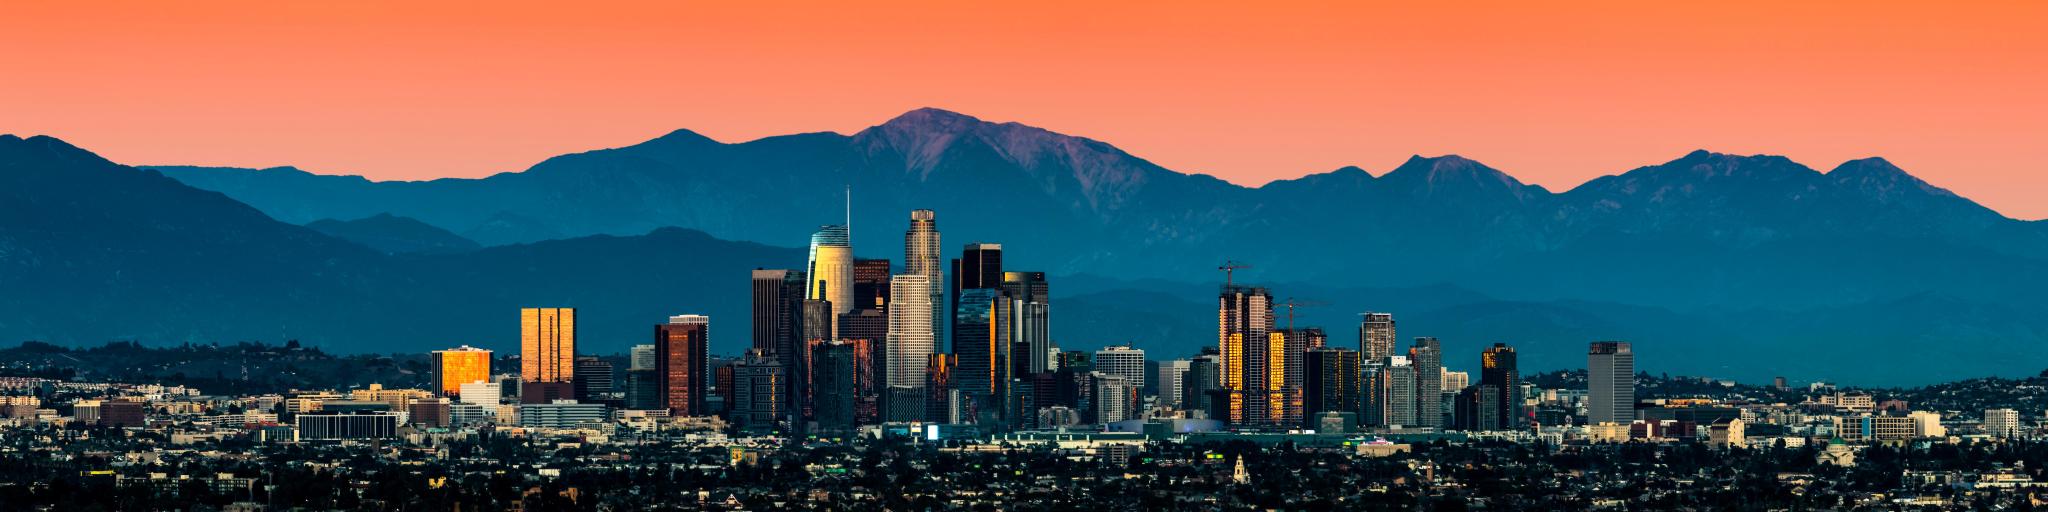 Panoramic view of Los Angeles skyline with mountains in the background and vibrant orange sunset